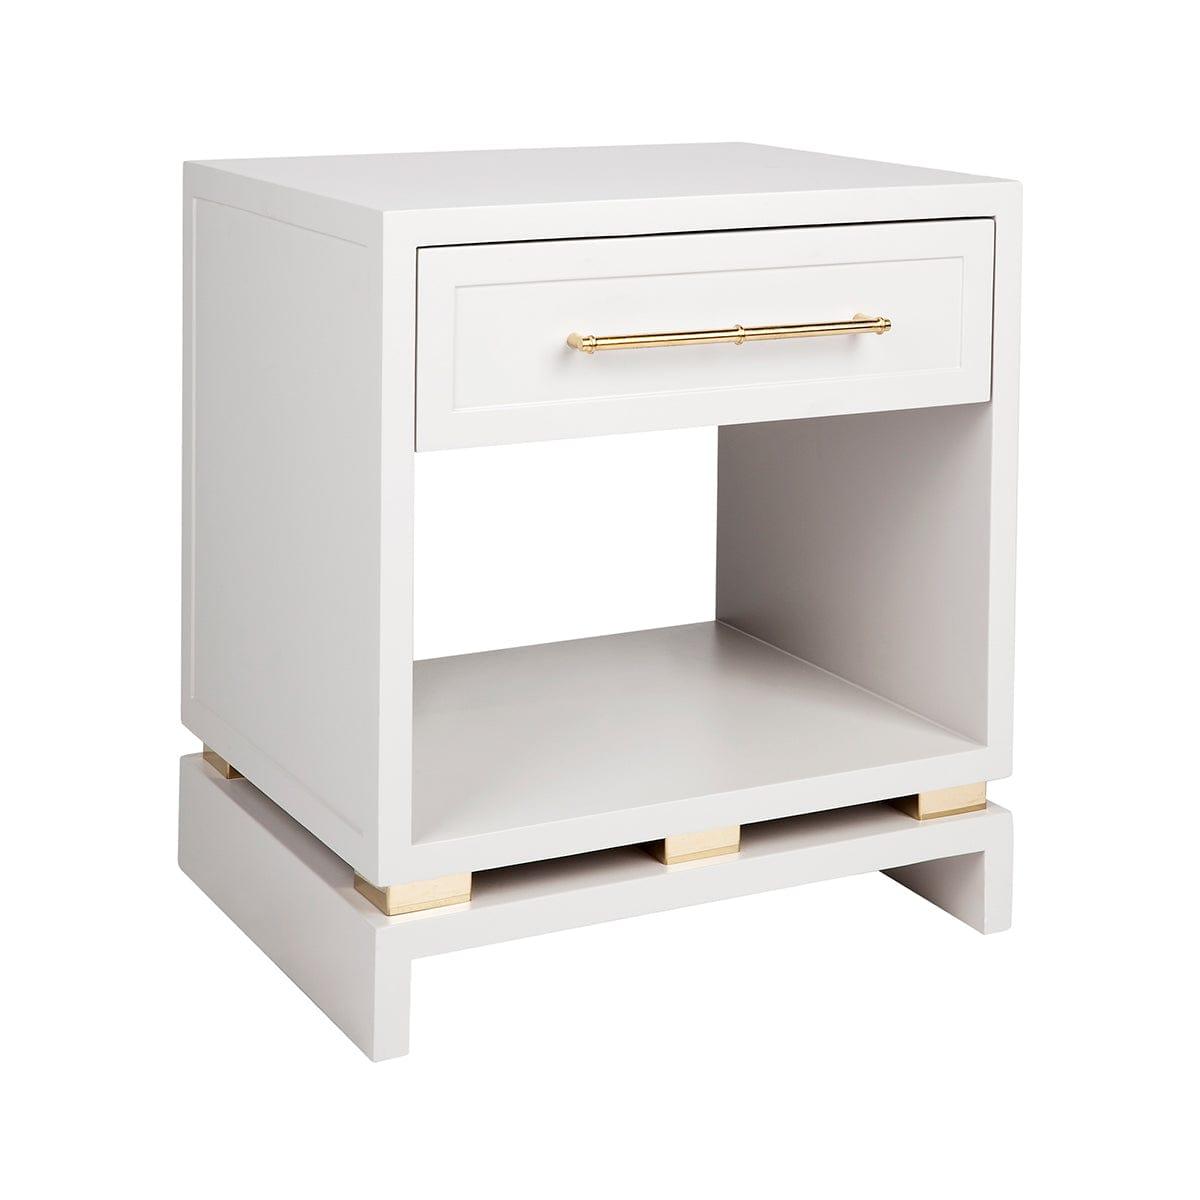 House Journey Pearl Bedside Table - Small Grey